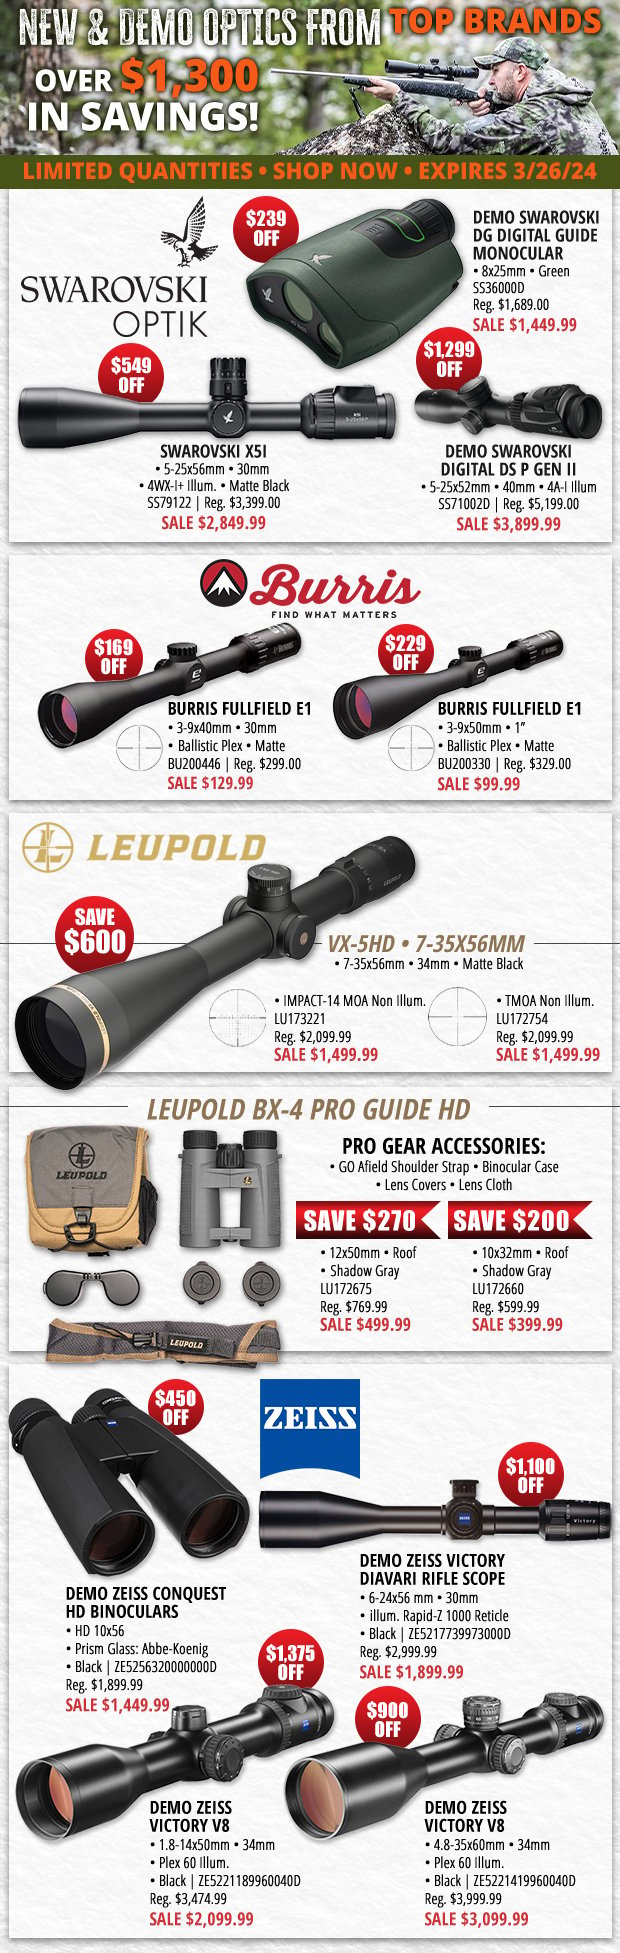 Over $1,300 in Savings on New & Demo Optics from Top Brands